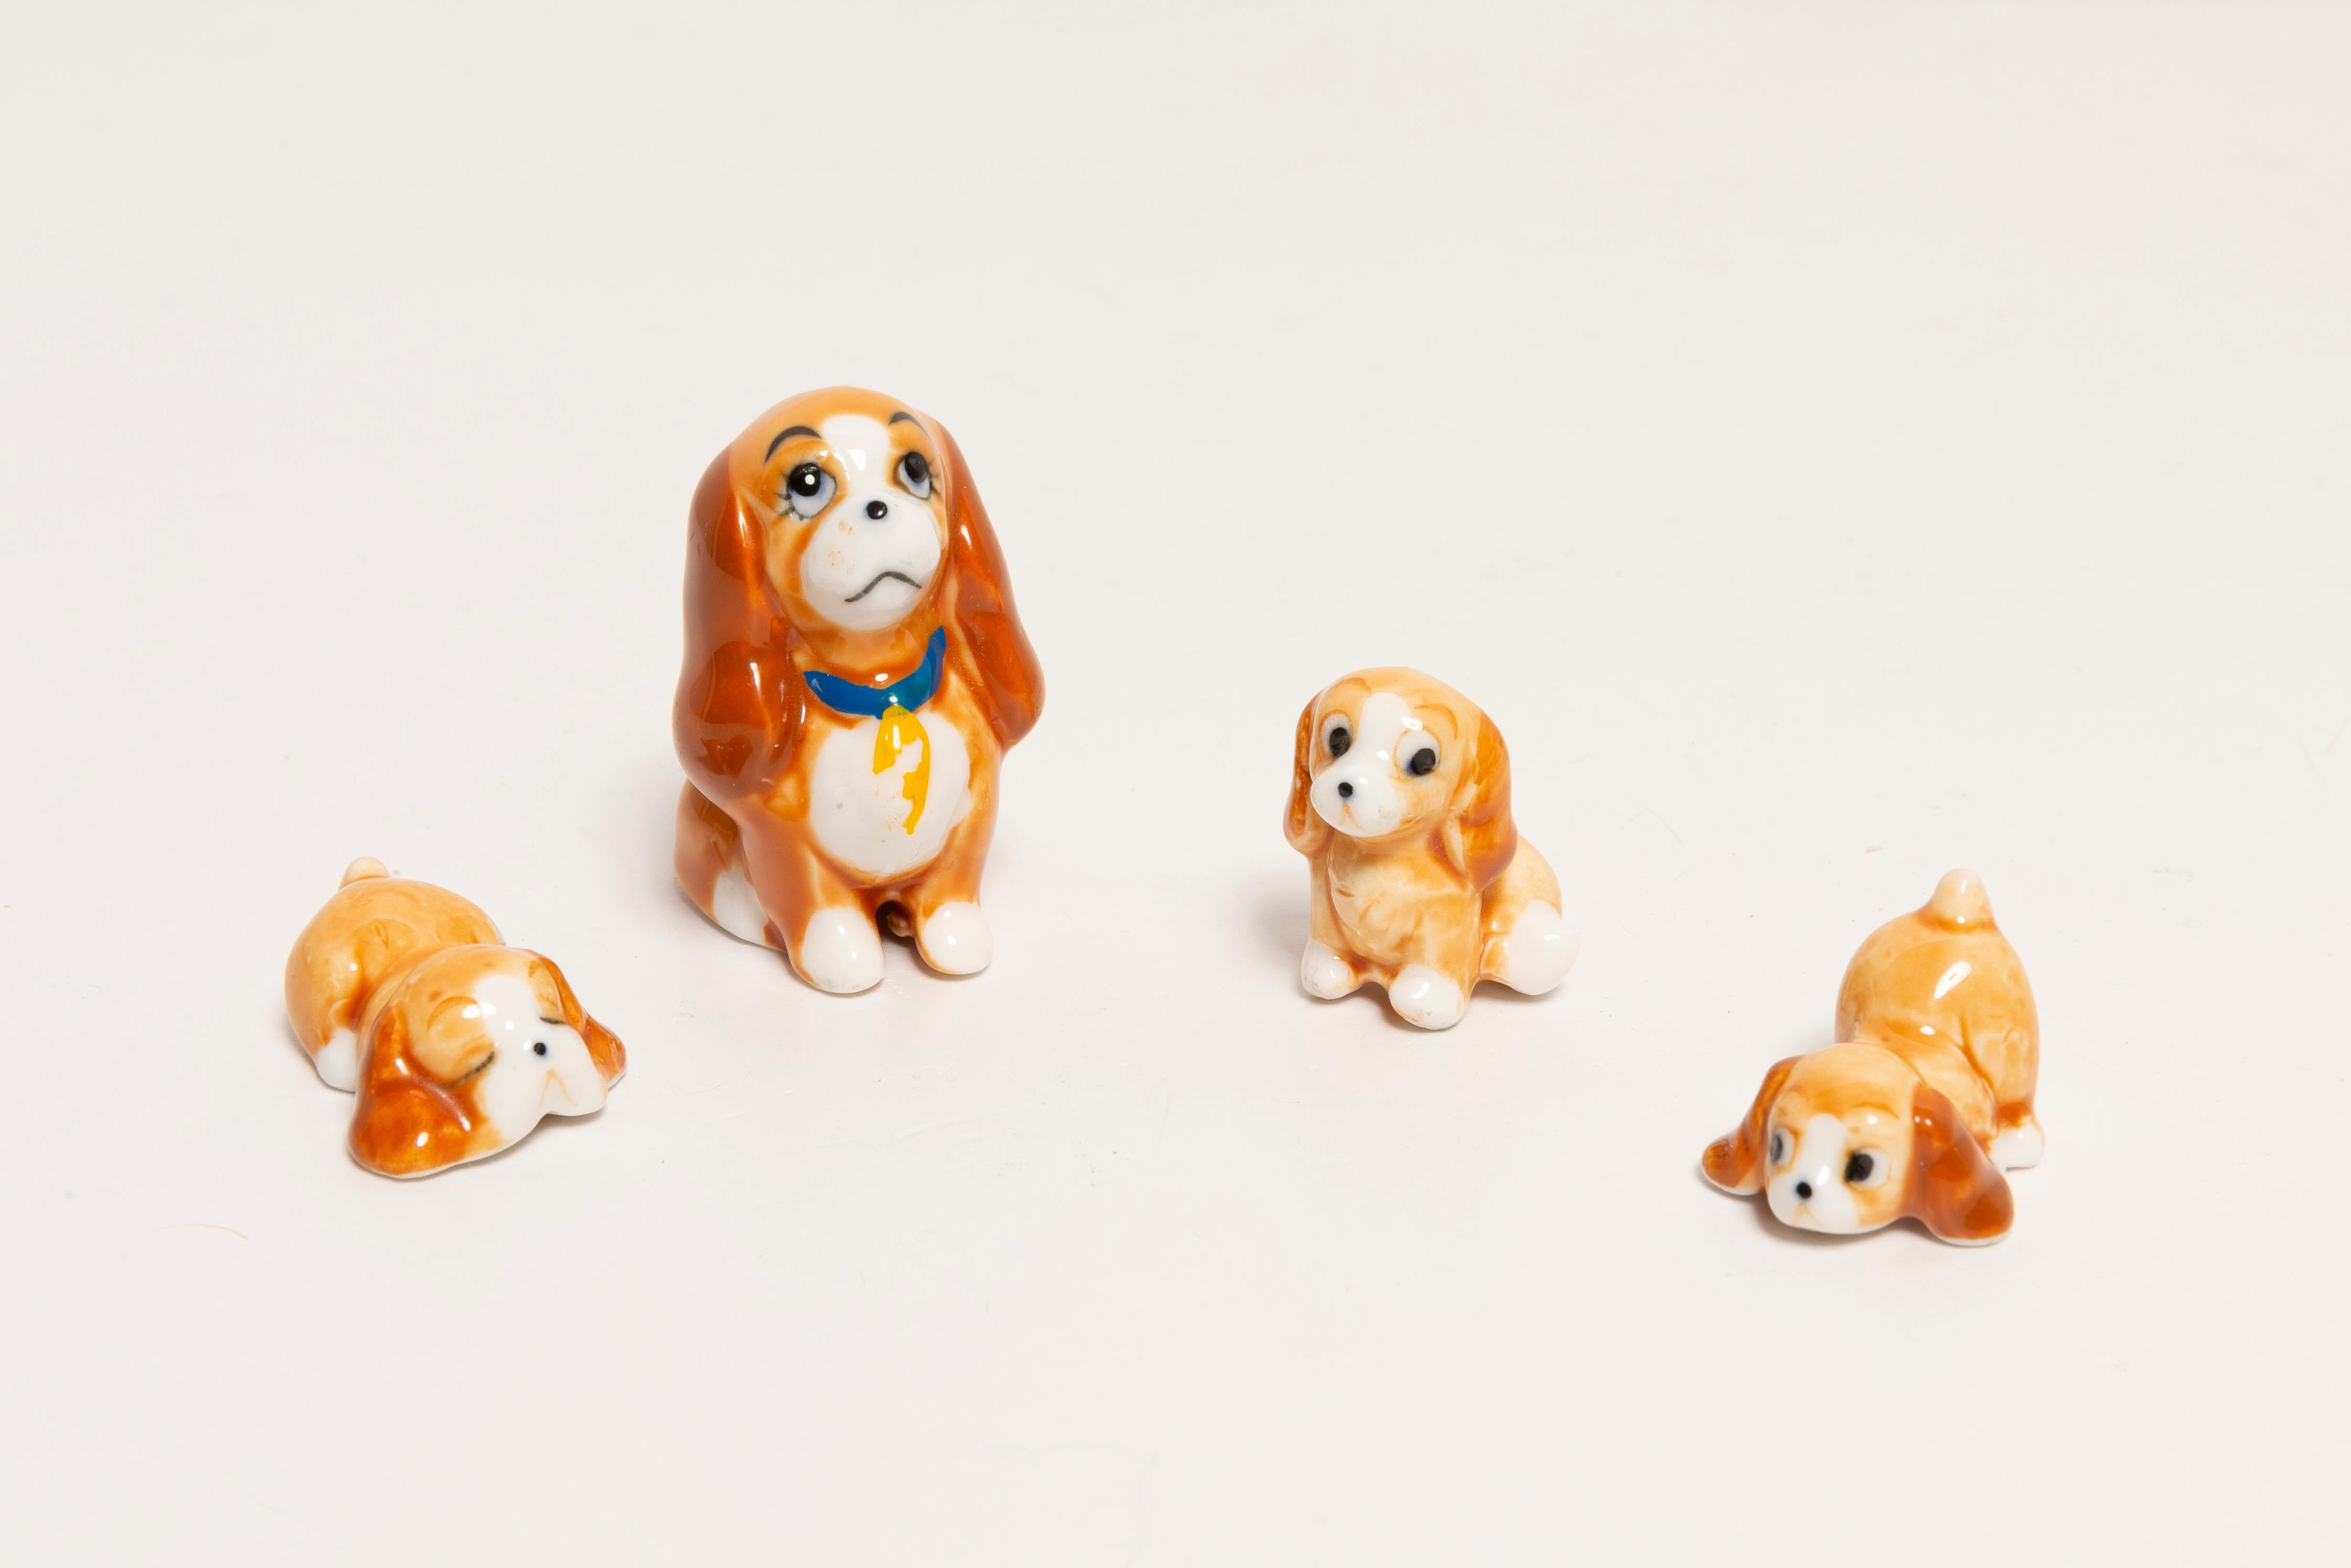 Painted ceramic, very good original vintage condition. No damages or cracks. Beautiful and unique decorative sculpture. Mini Spaniel Dogs Sculpture was produced in Italy. Only one set available. They are really small! Mommy-3 x 4 cm, babies-1 x 2 cm.